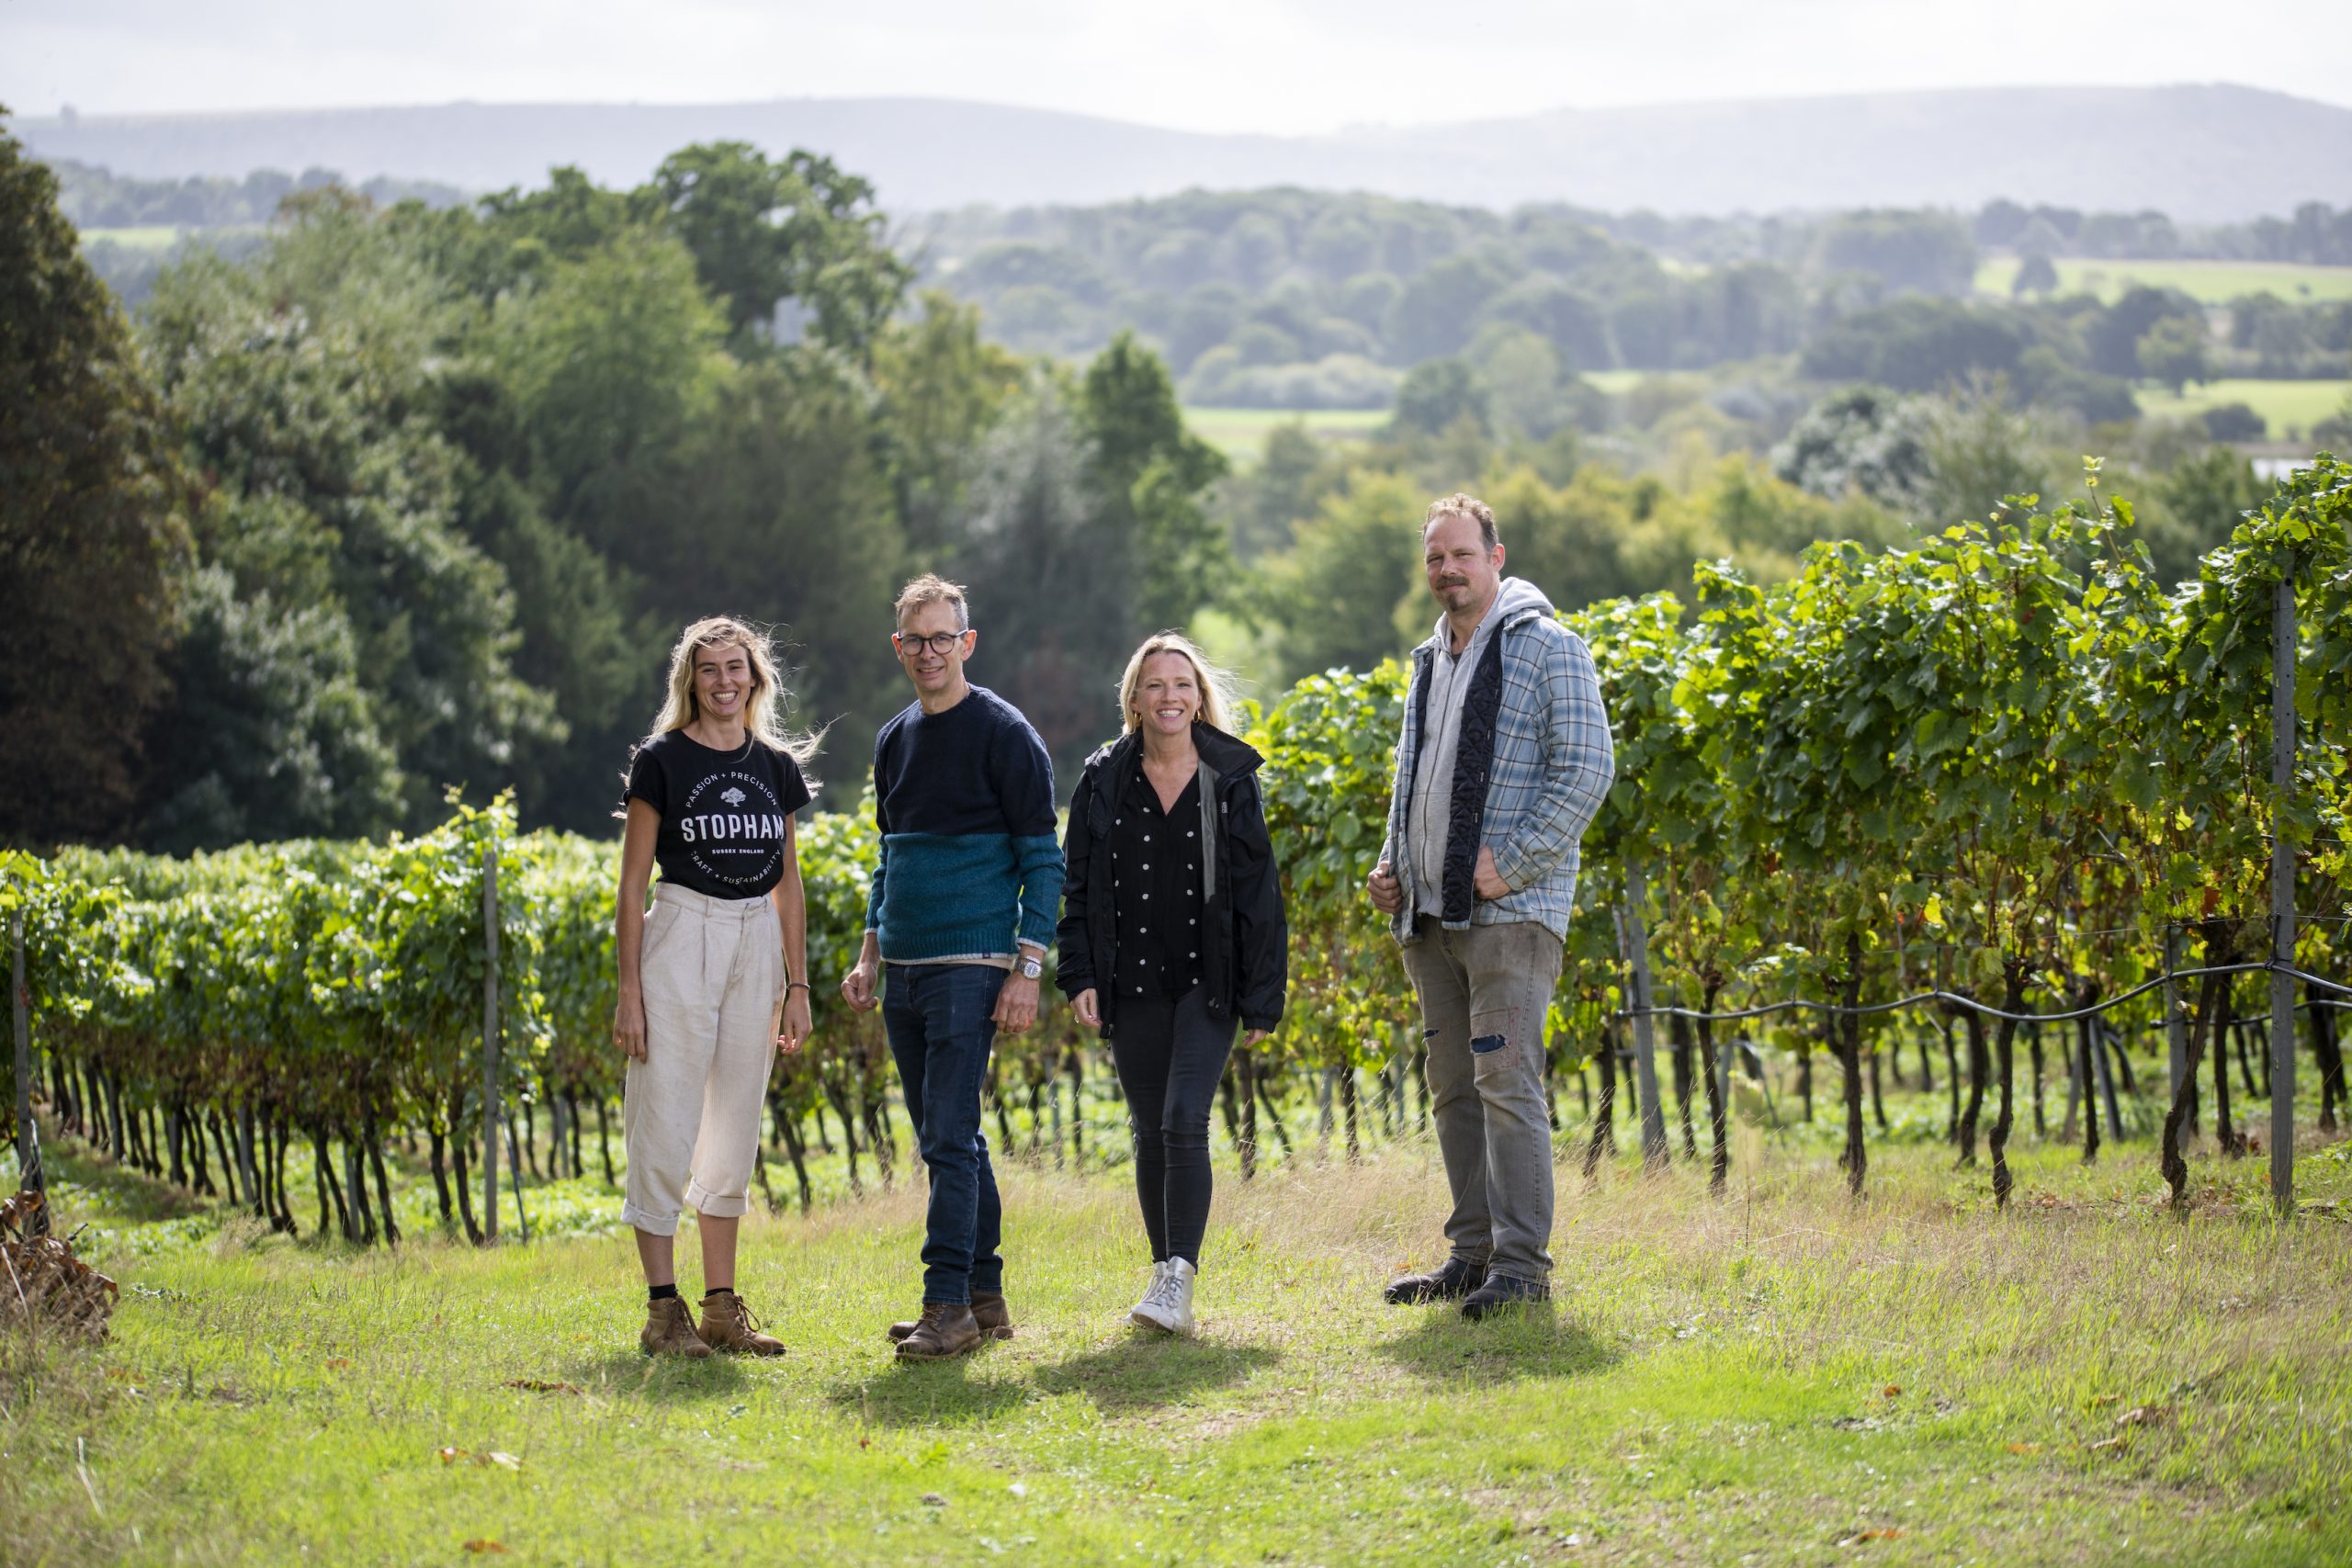 The team from the Stopham Vineyards stands in front of their vines in Sussex, England.